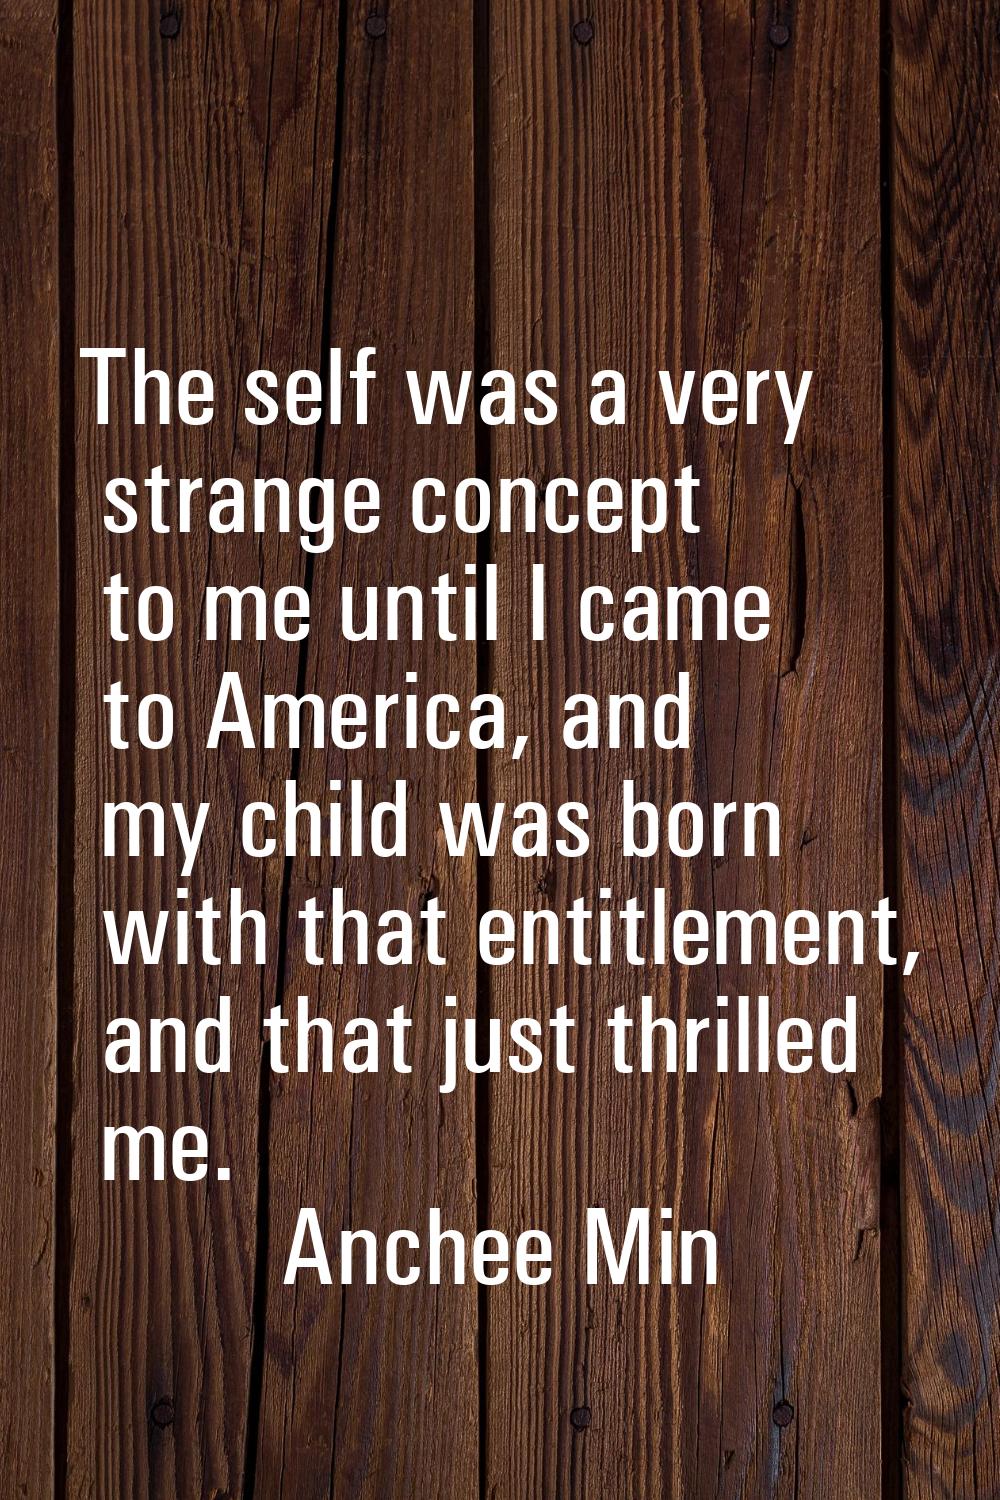 The self was a very strange concept to me until I came to America, and my child was born with that 